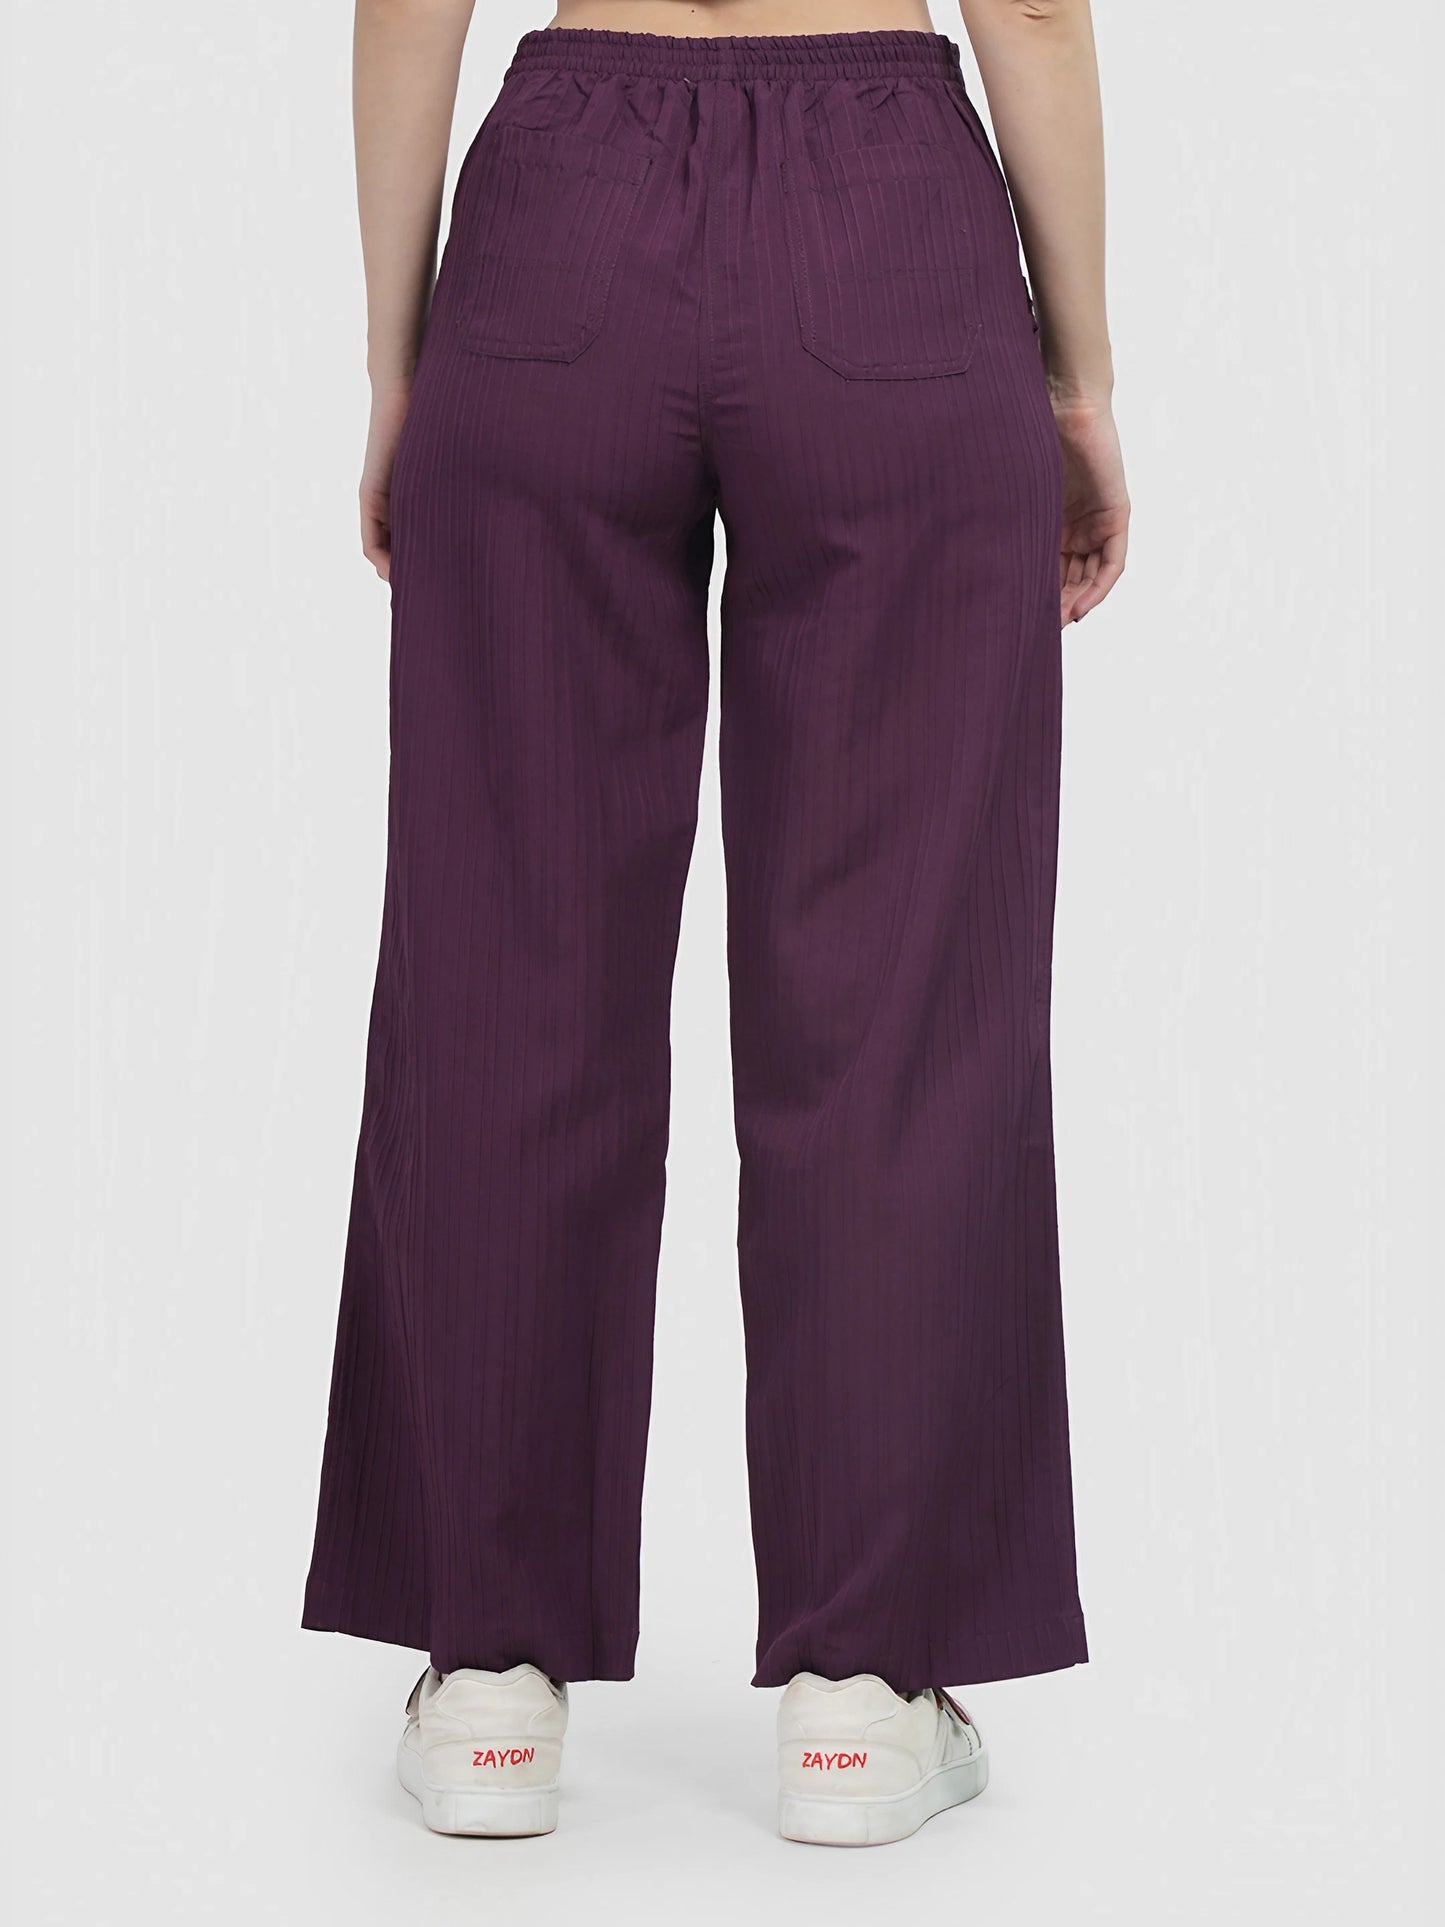 Purple Colour | Women Formal Trousers Being Flawless